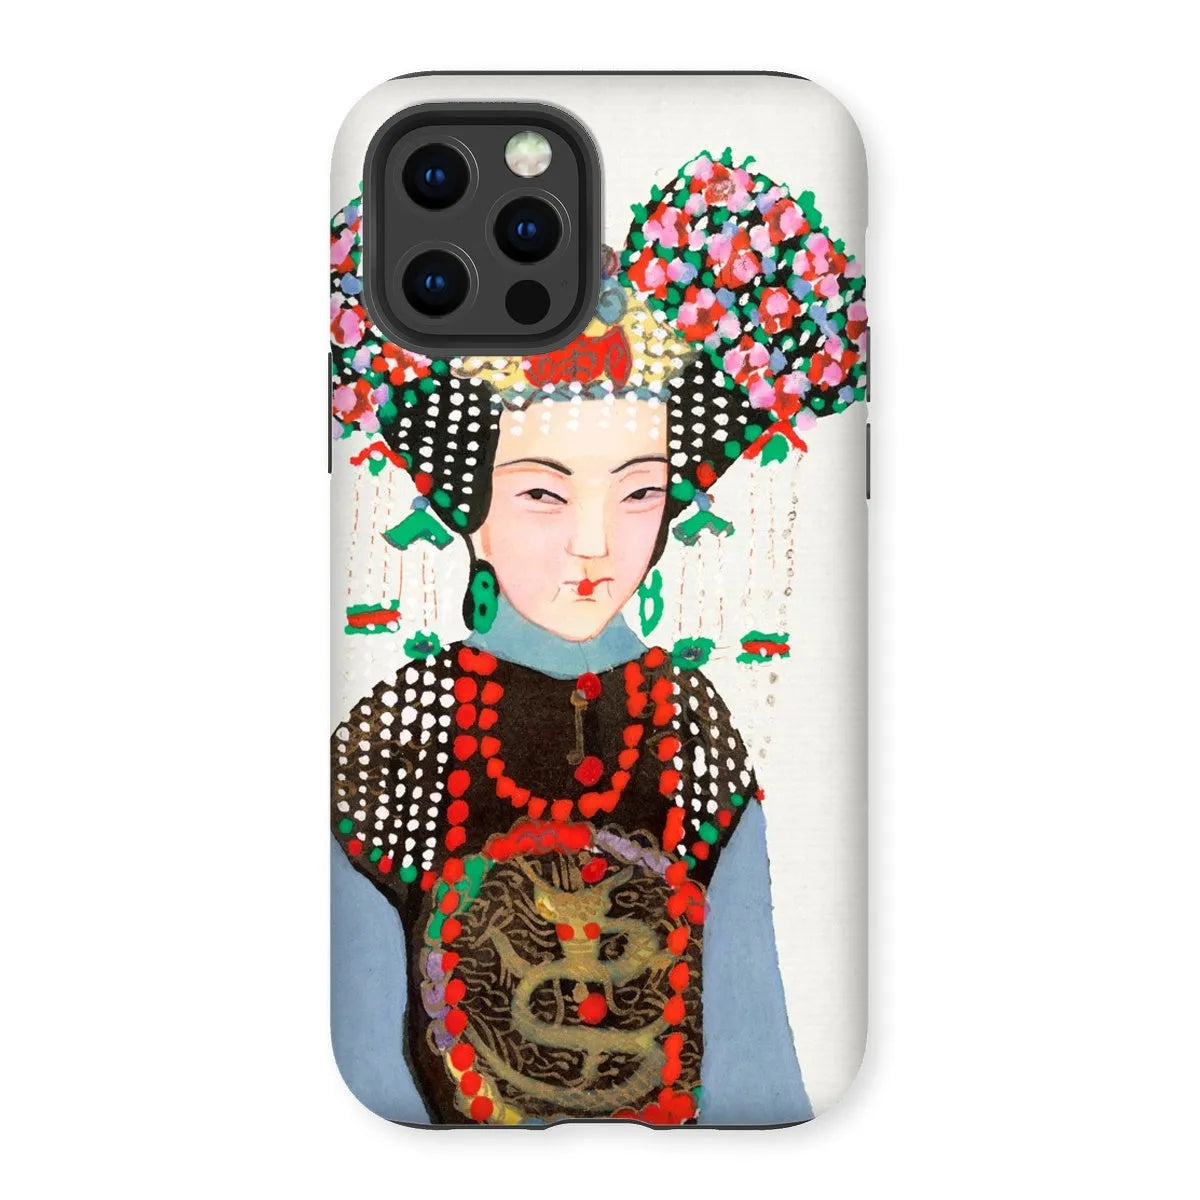 Chinese Empress - Manchu Art Phone Case - Iphone 12 Pro / Matte - Mobile Phone Cases - Aesthetic Art